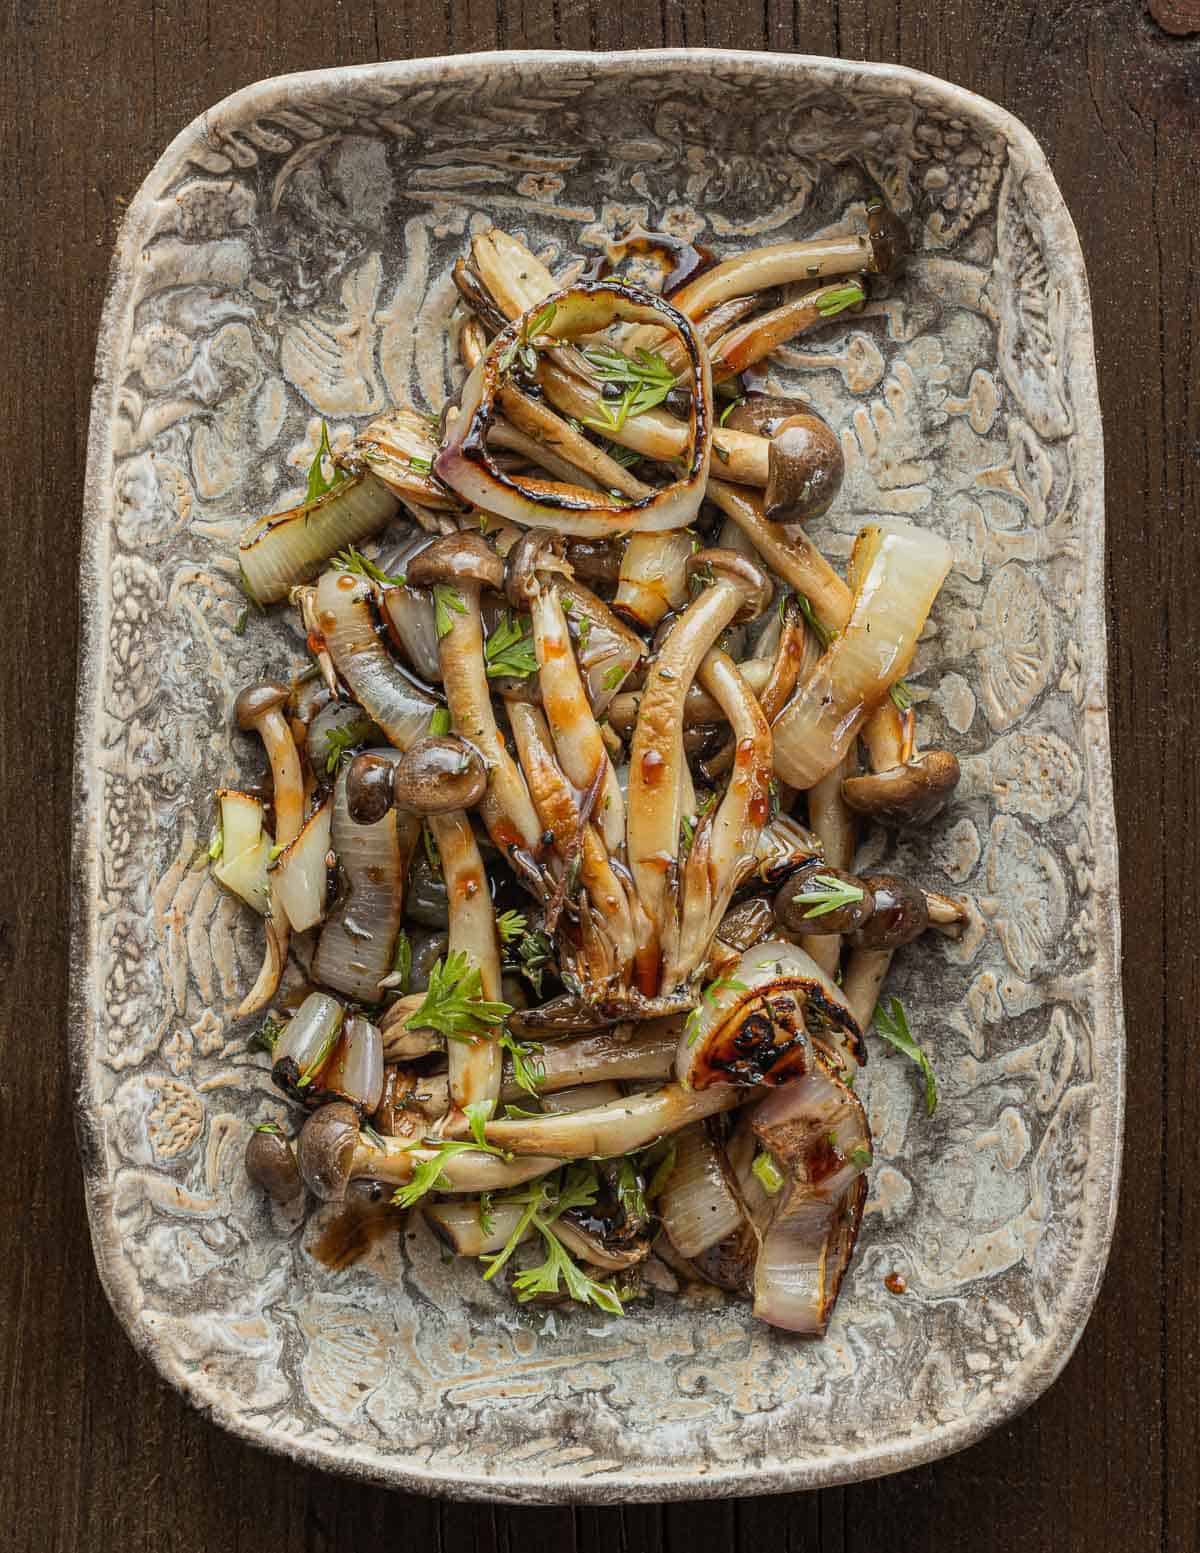 Marinated beech mushrooms mixed with shallots and balsamic vinegar in a ceramic serving dish. 